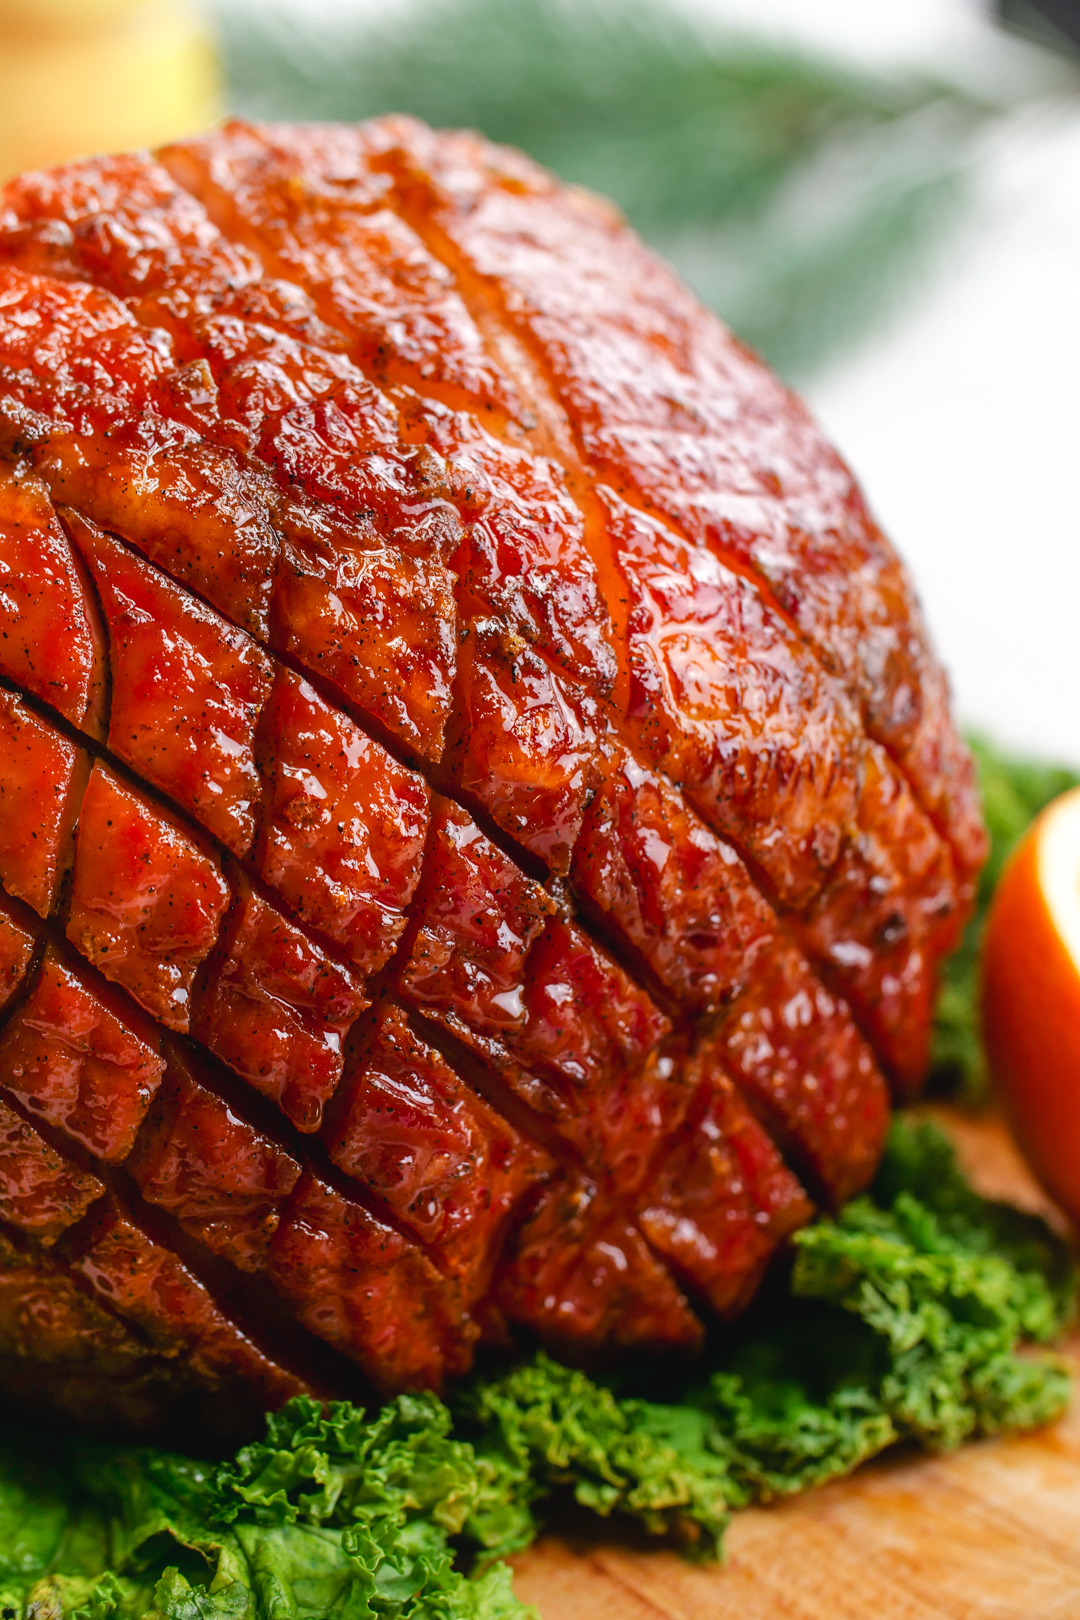 A perfectly scoured and glazed ham